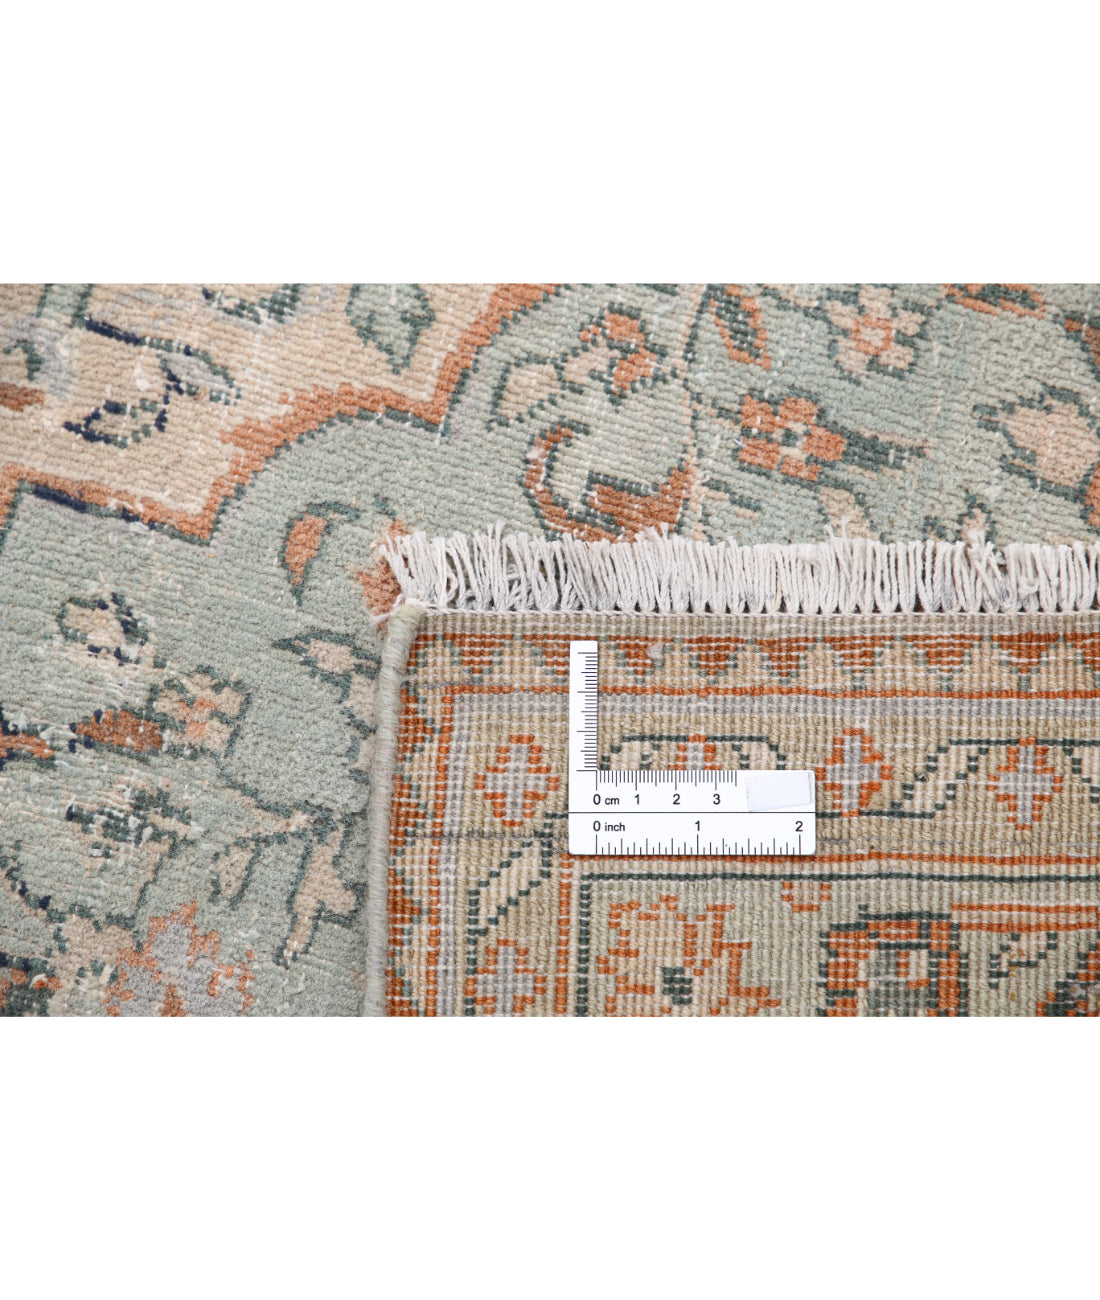 Hand Knotted Vintage Persian Kashan Wool Rug - 9'6'' x 13'2'' 9'6'' x 13'2'' (285 X 395) / Ivory / Ivory